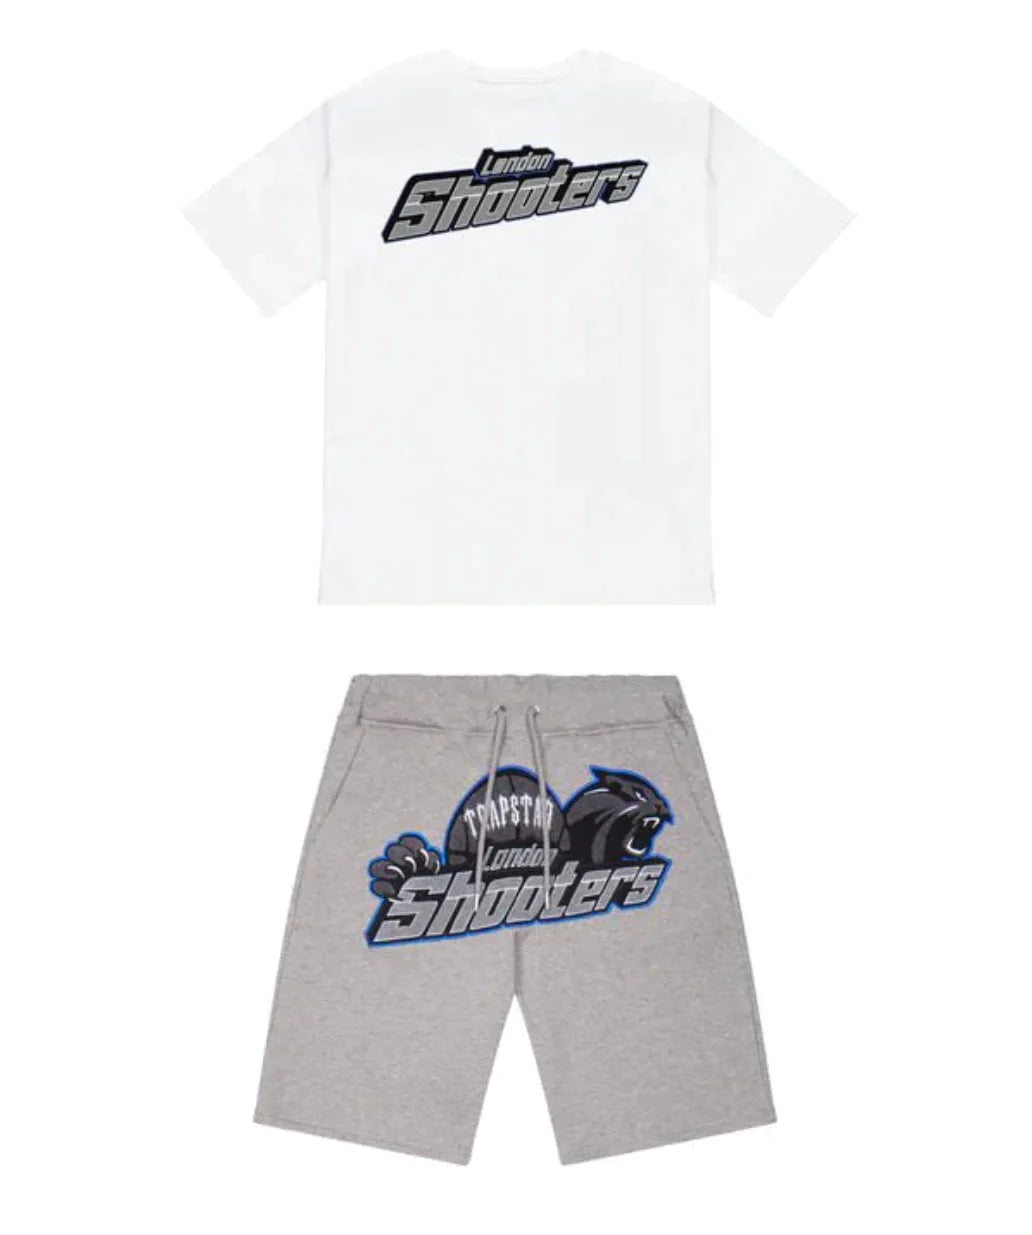 TRAPSTAR SHOOTERS SHORTS SET - WHITE ICE FLAVOURS EDITION